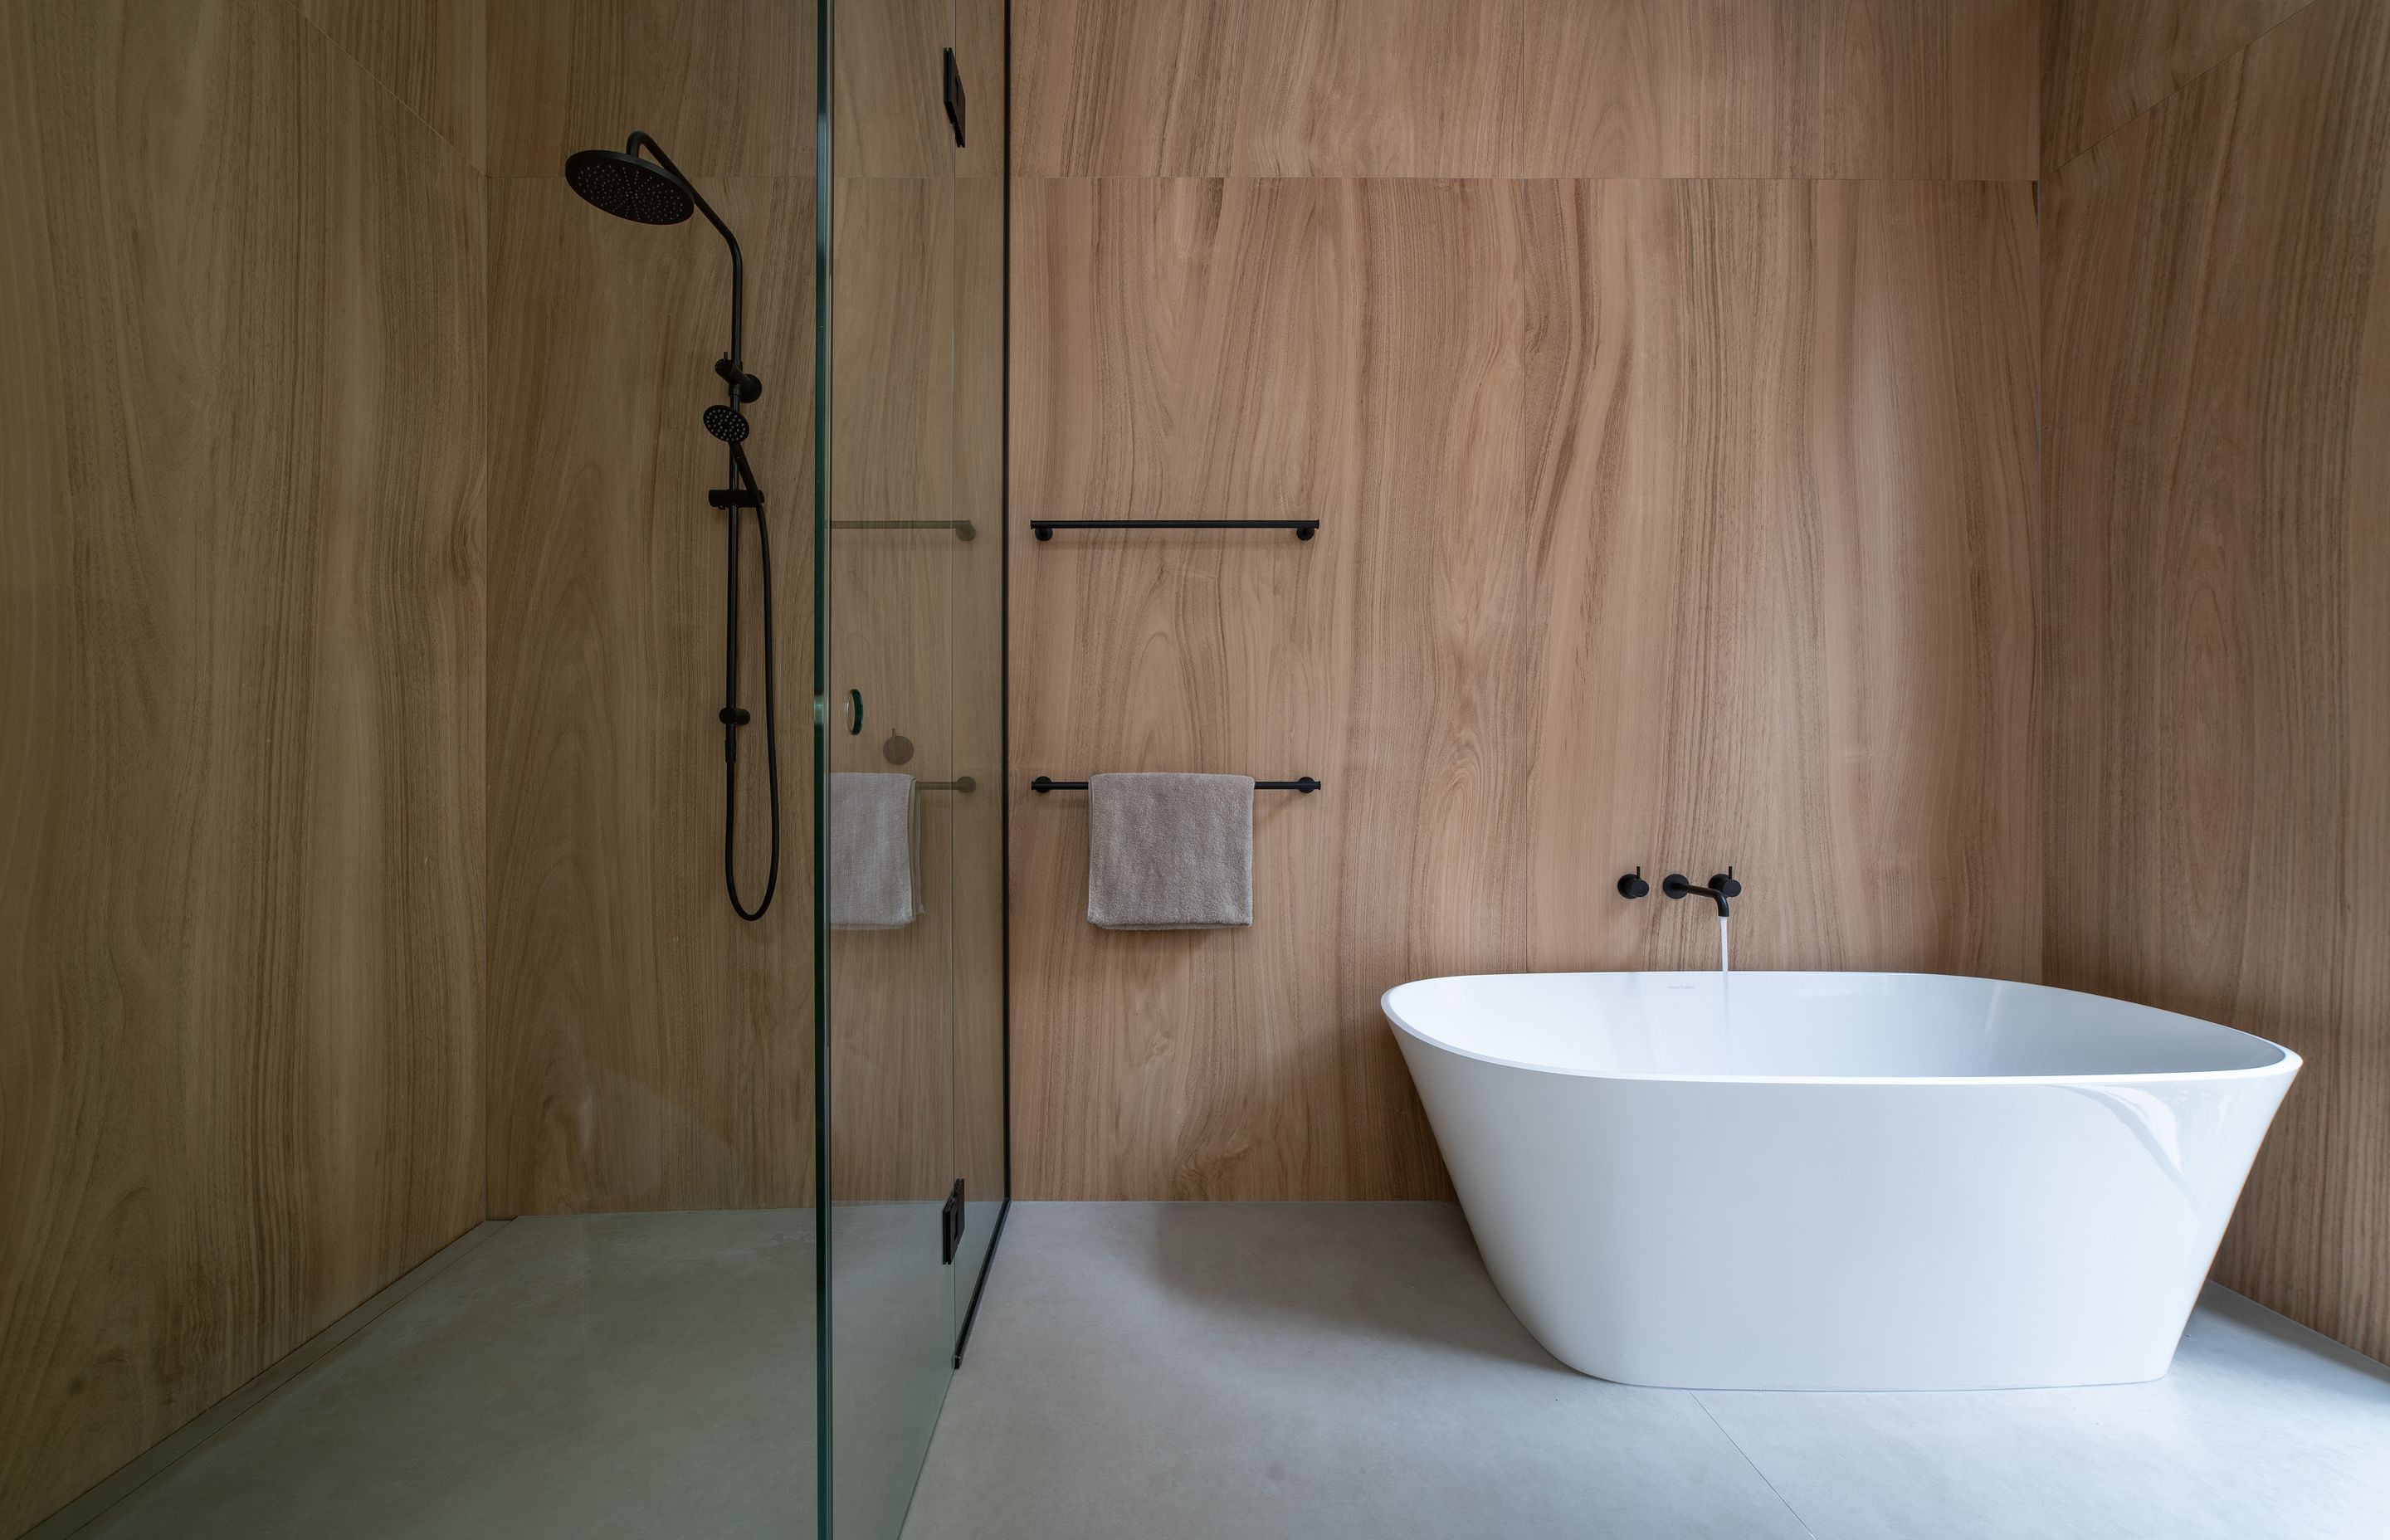 Oversized timber-look tiles create a peaceful, calming space in the ensuite bathroom, consistent with the palette in the rest of the home.